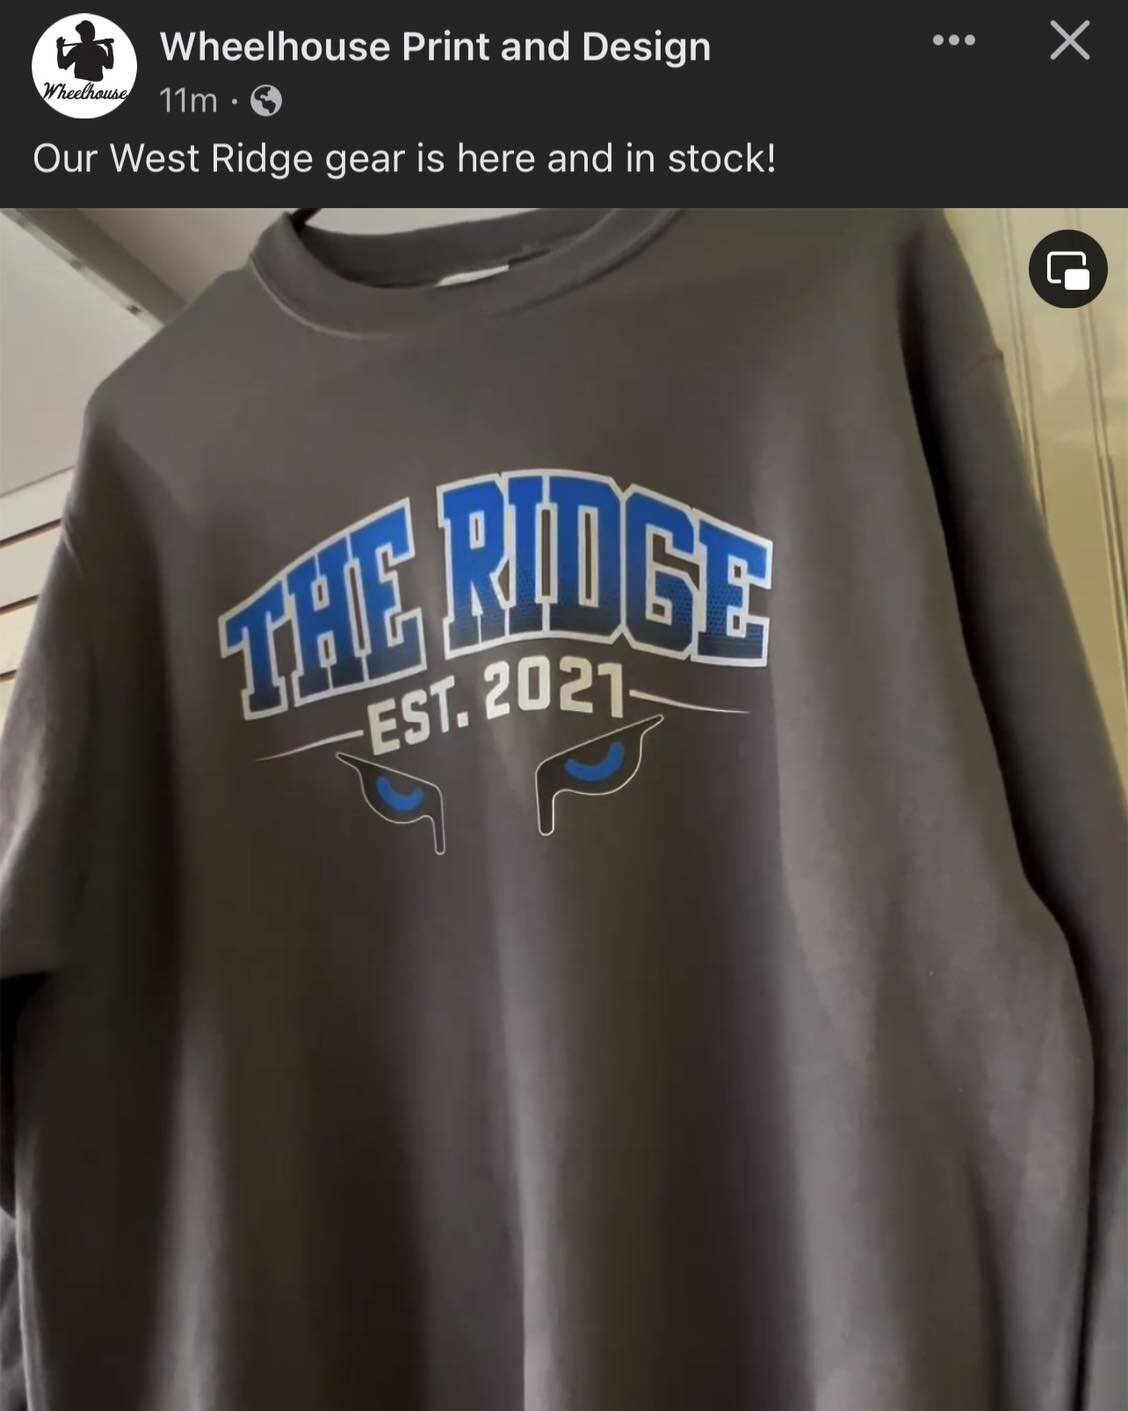 Our West Ridge gear is here and in stock! Drop by the store front to see all of our items. #wheelhouse #supportlocal #WRHS